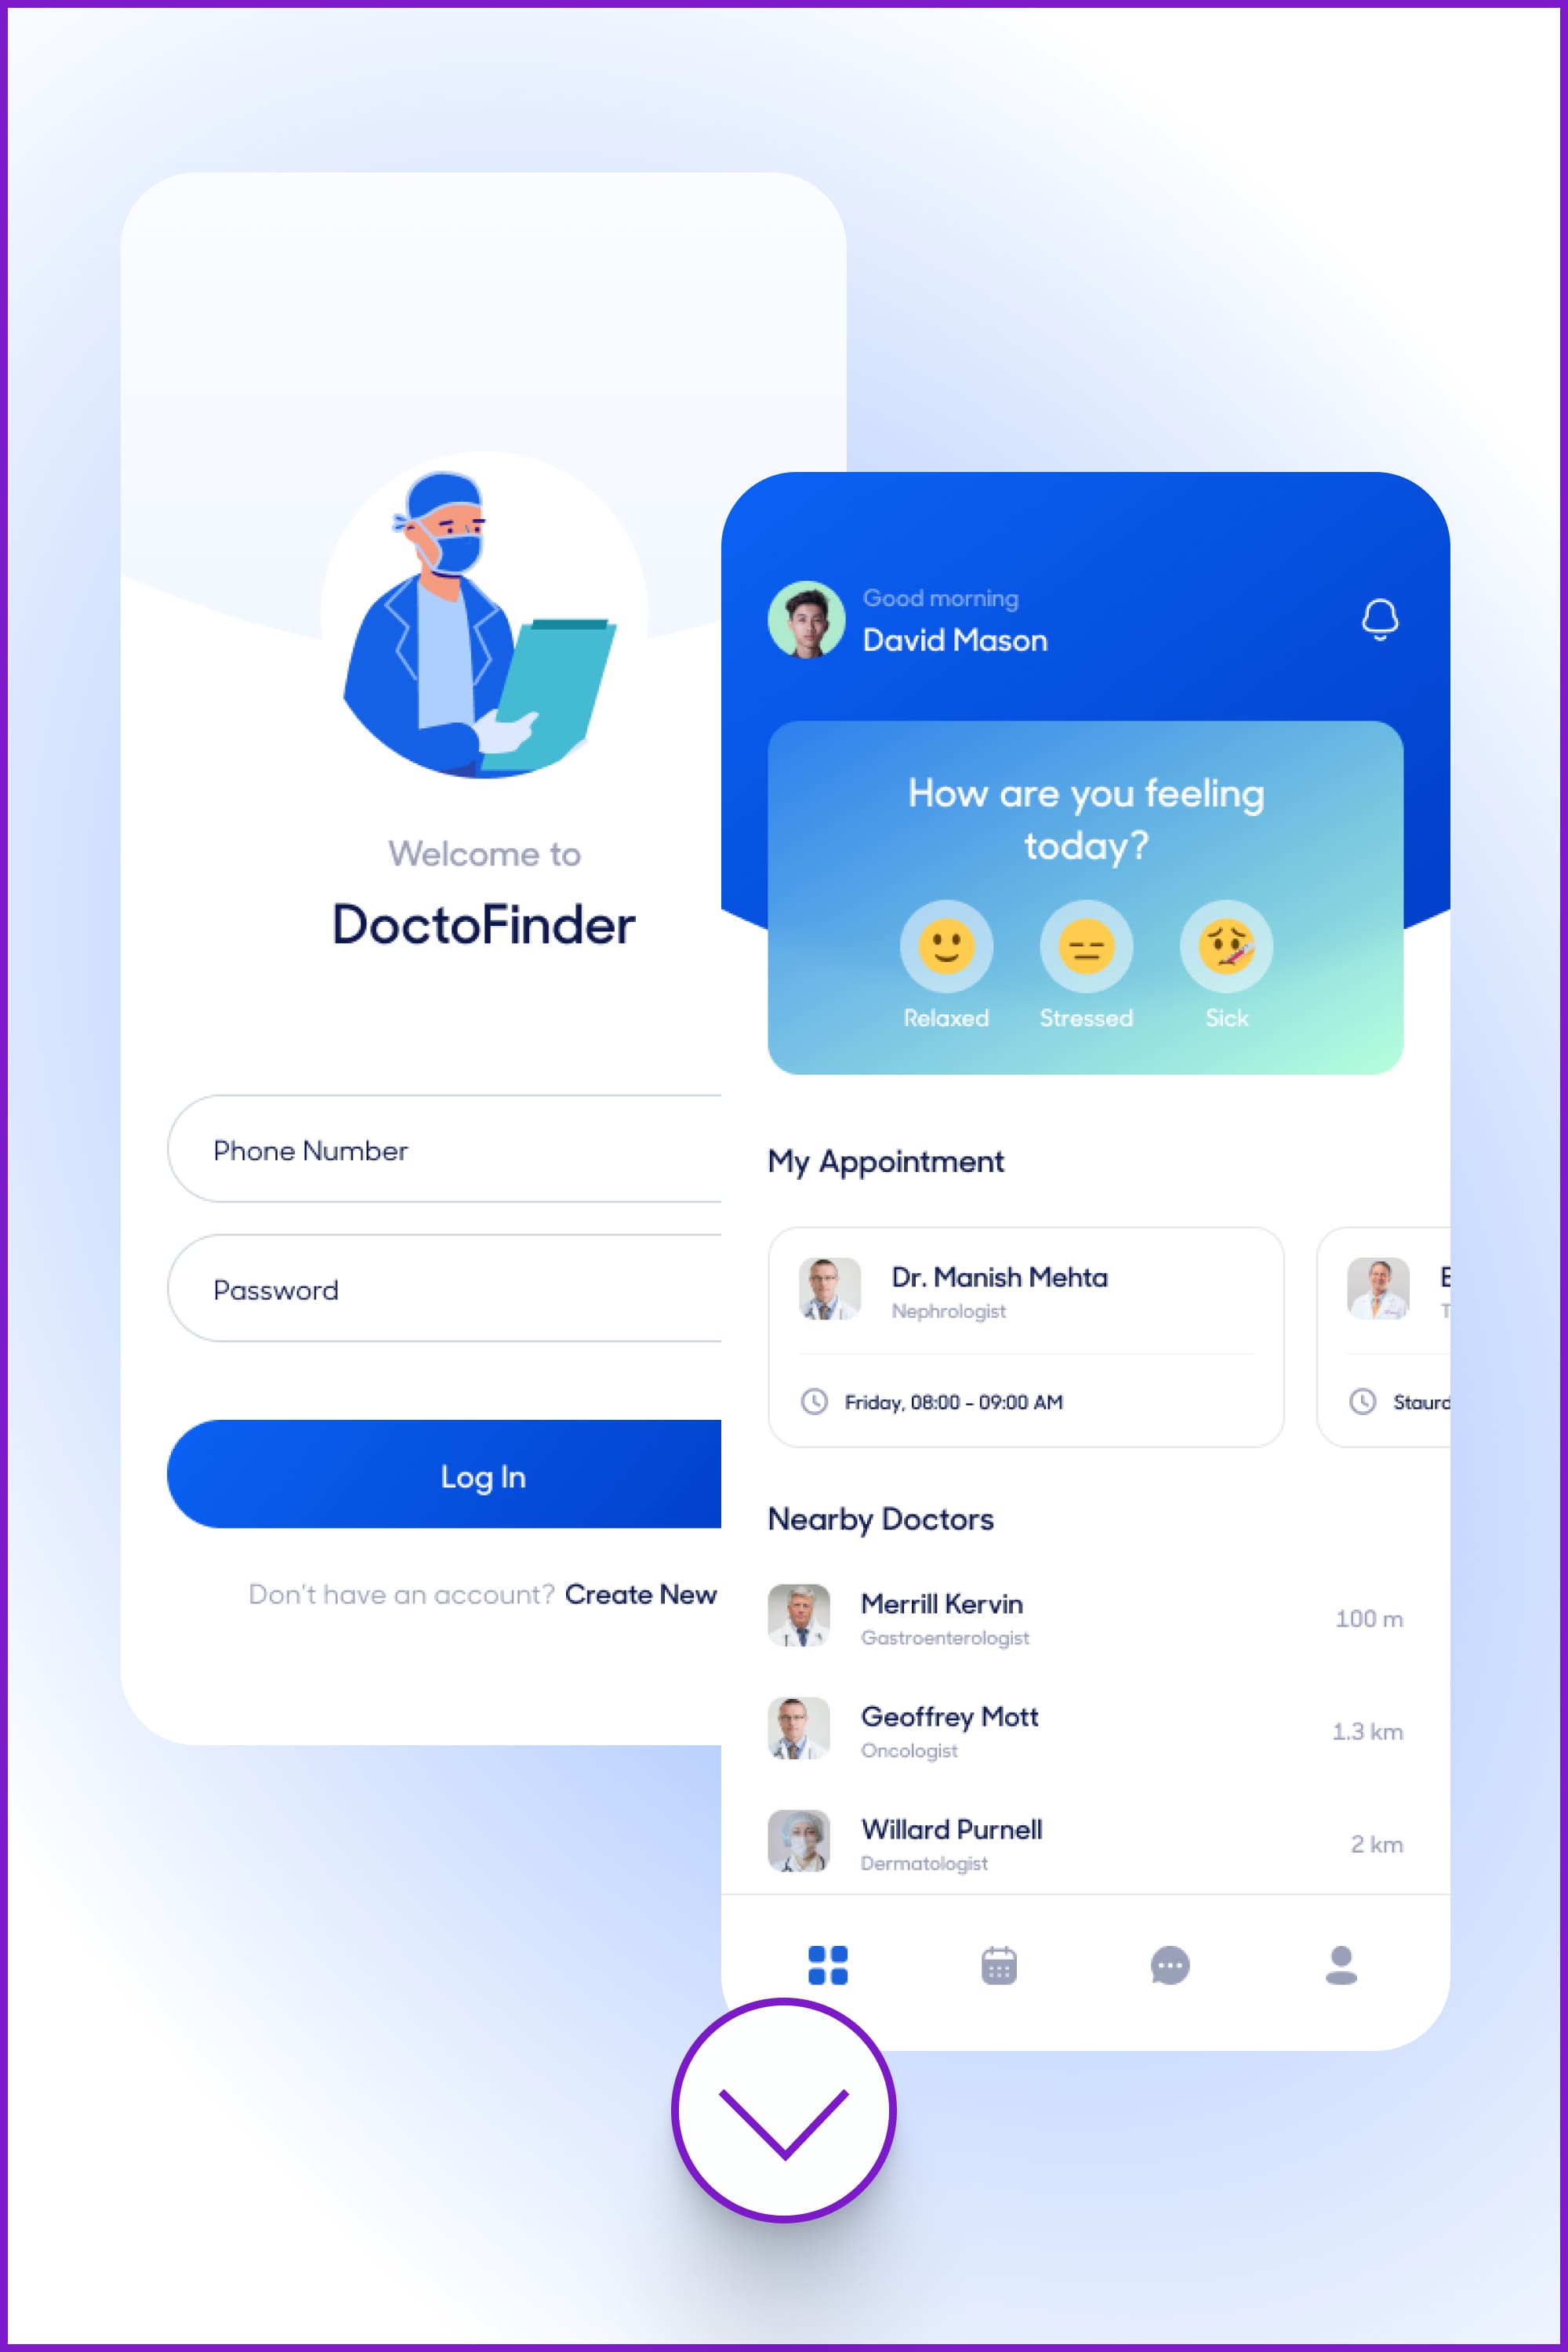 Screenshots of interface for a doctor search application.